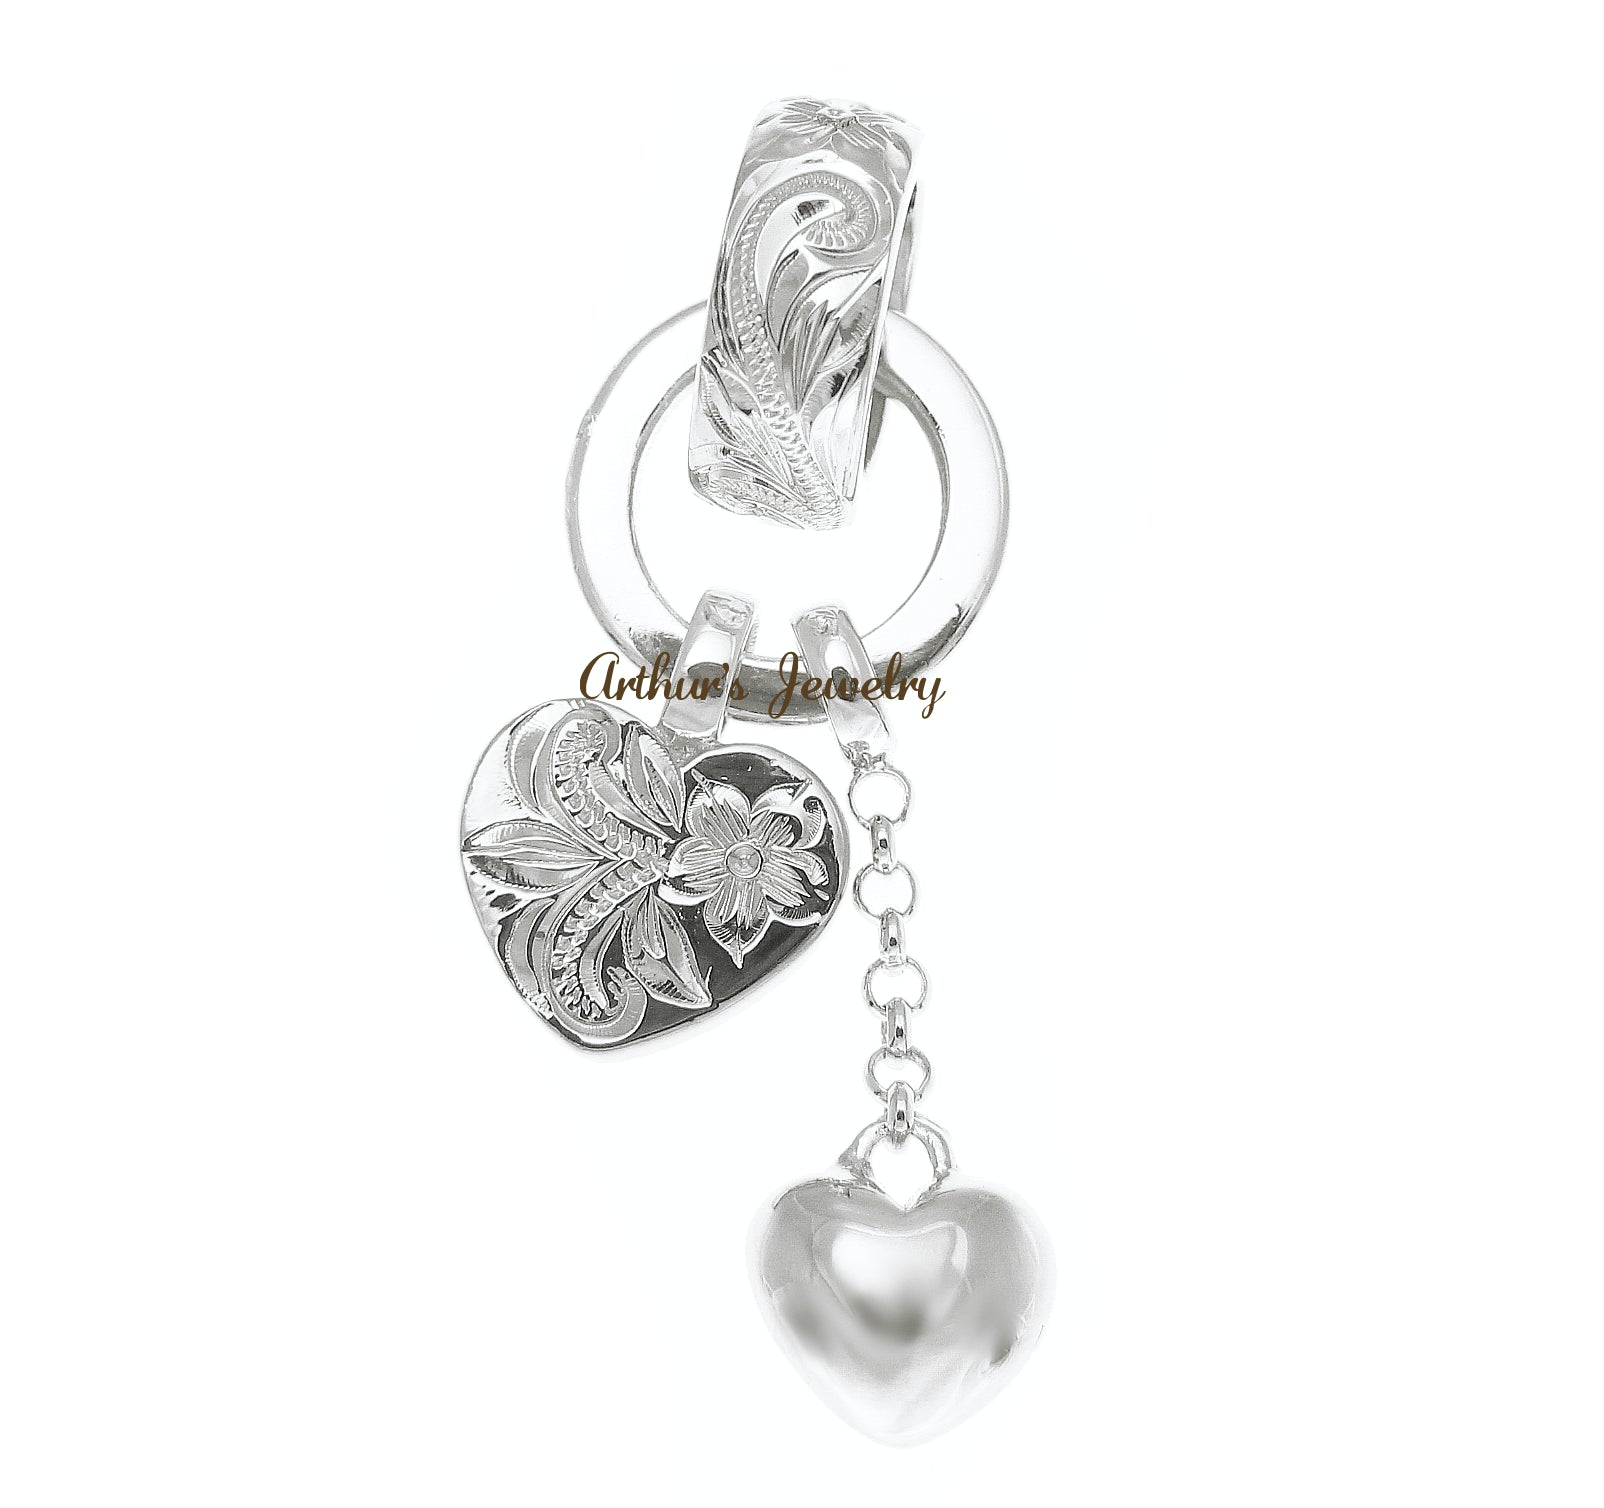 Ornate Heart Antique Silver Plated Lead and Nickel Safe Zinc Alloy 10x9mm Valentine  Beads Q24 per Pkg